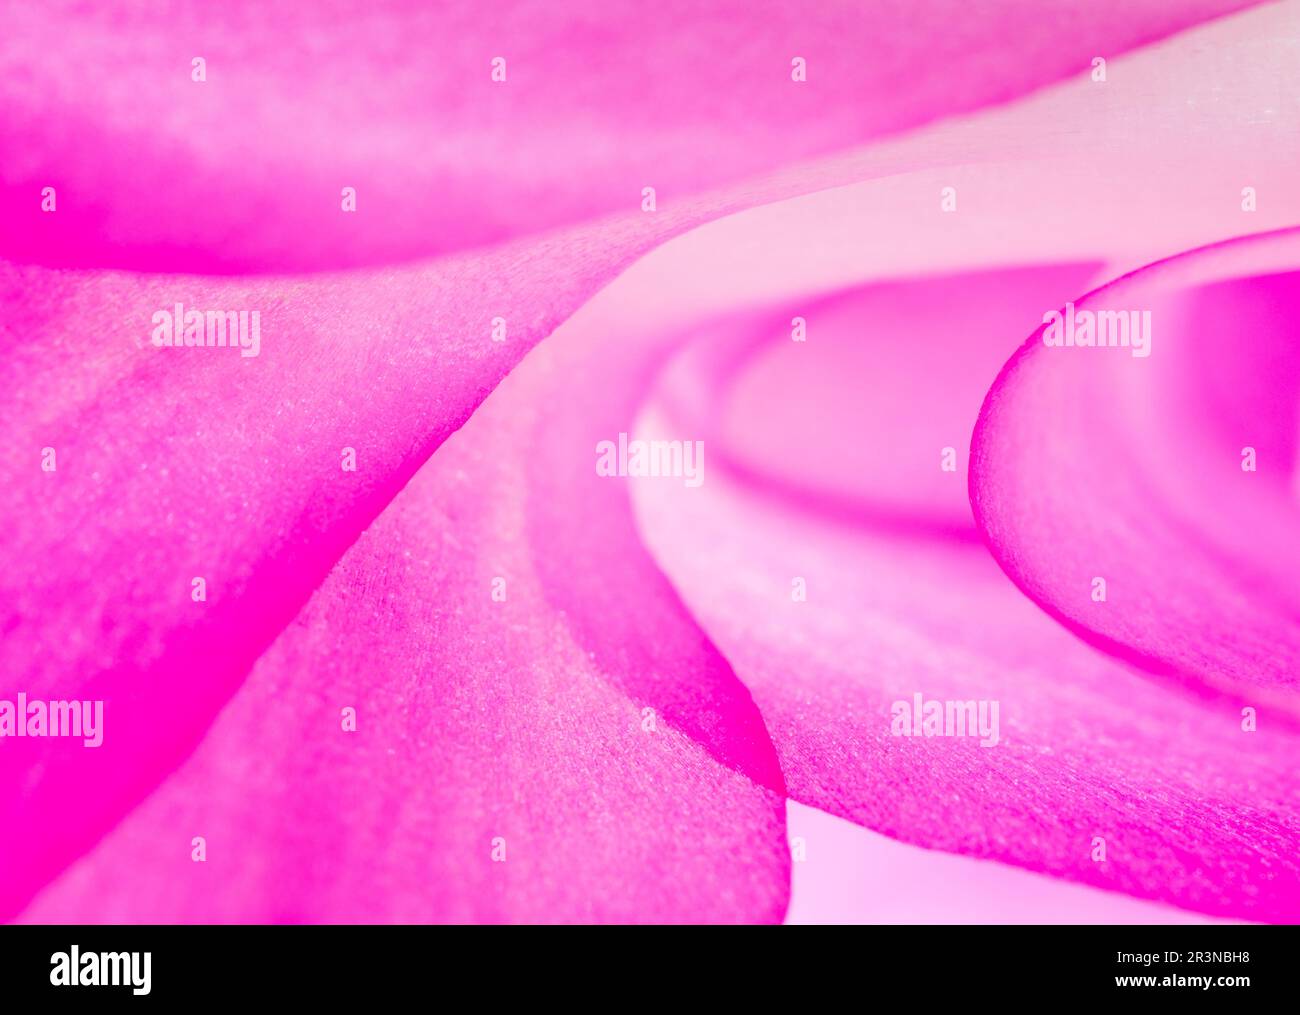 Macro view of blossoming flower background with bright smooth pink petals surface with white spots Stock Photo